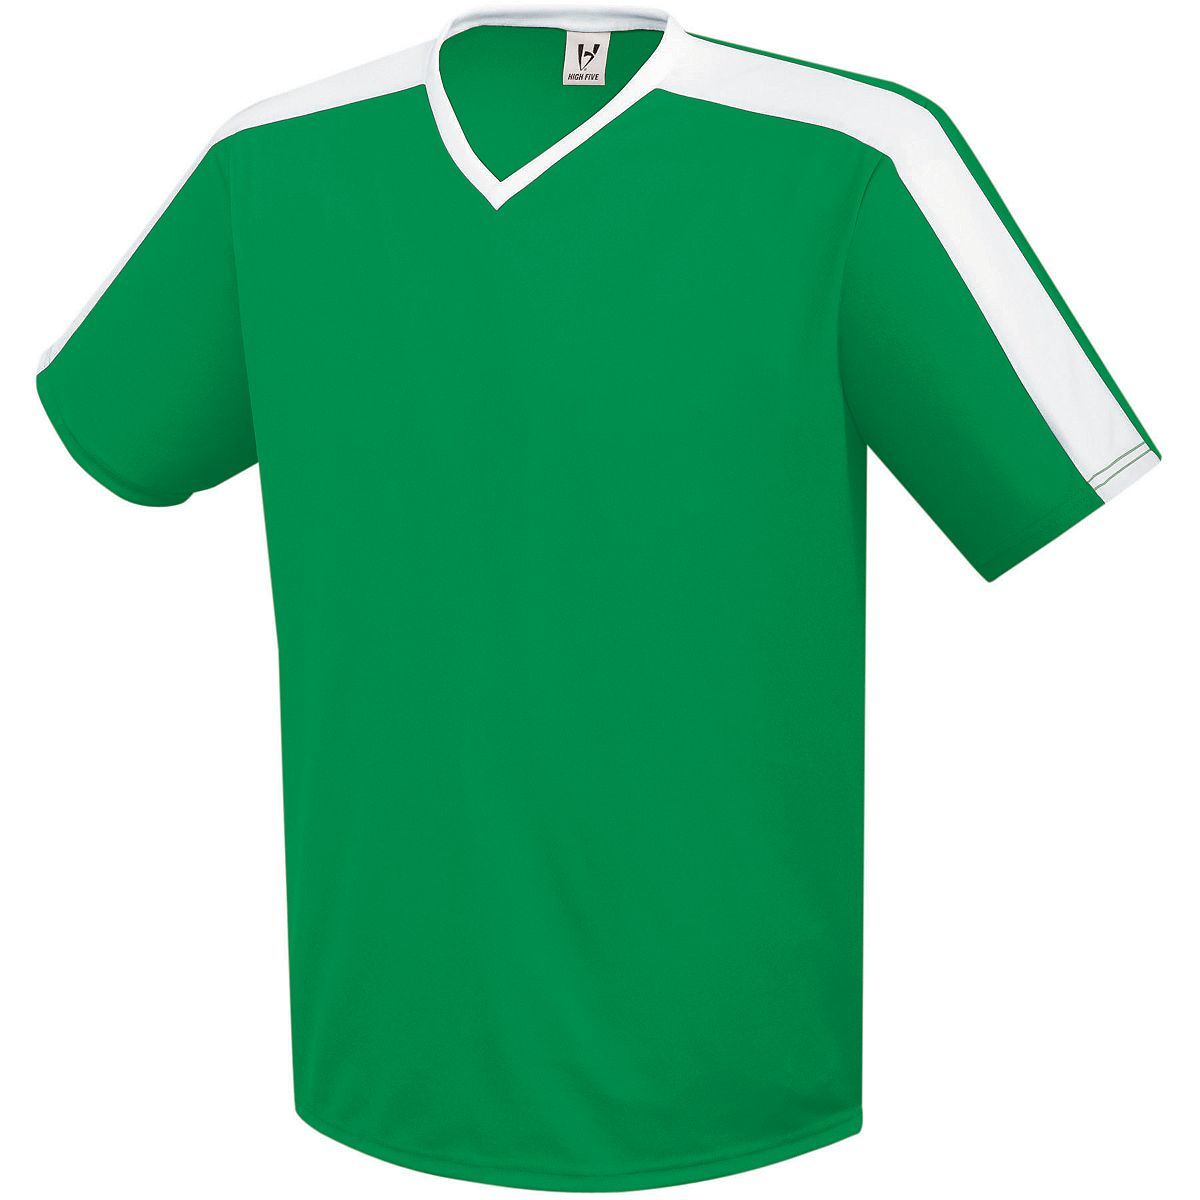 High 5 Genesis Soccer Jersey in Kelly/White  -Part of the Adult, Adult-Jersey, High5-Products, Soccer, Shirts, All-Sports-1 product lines at KanaleyCreations.com